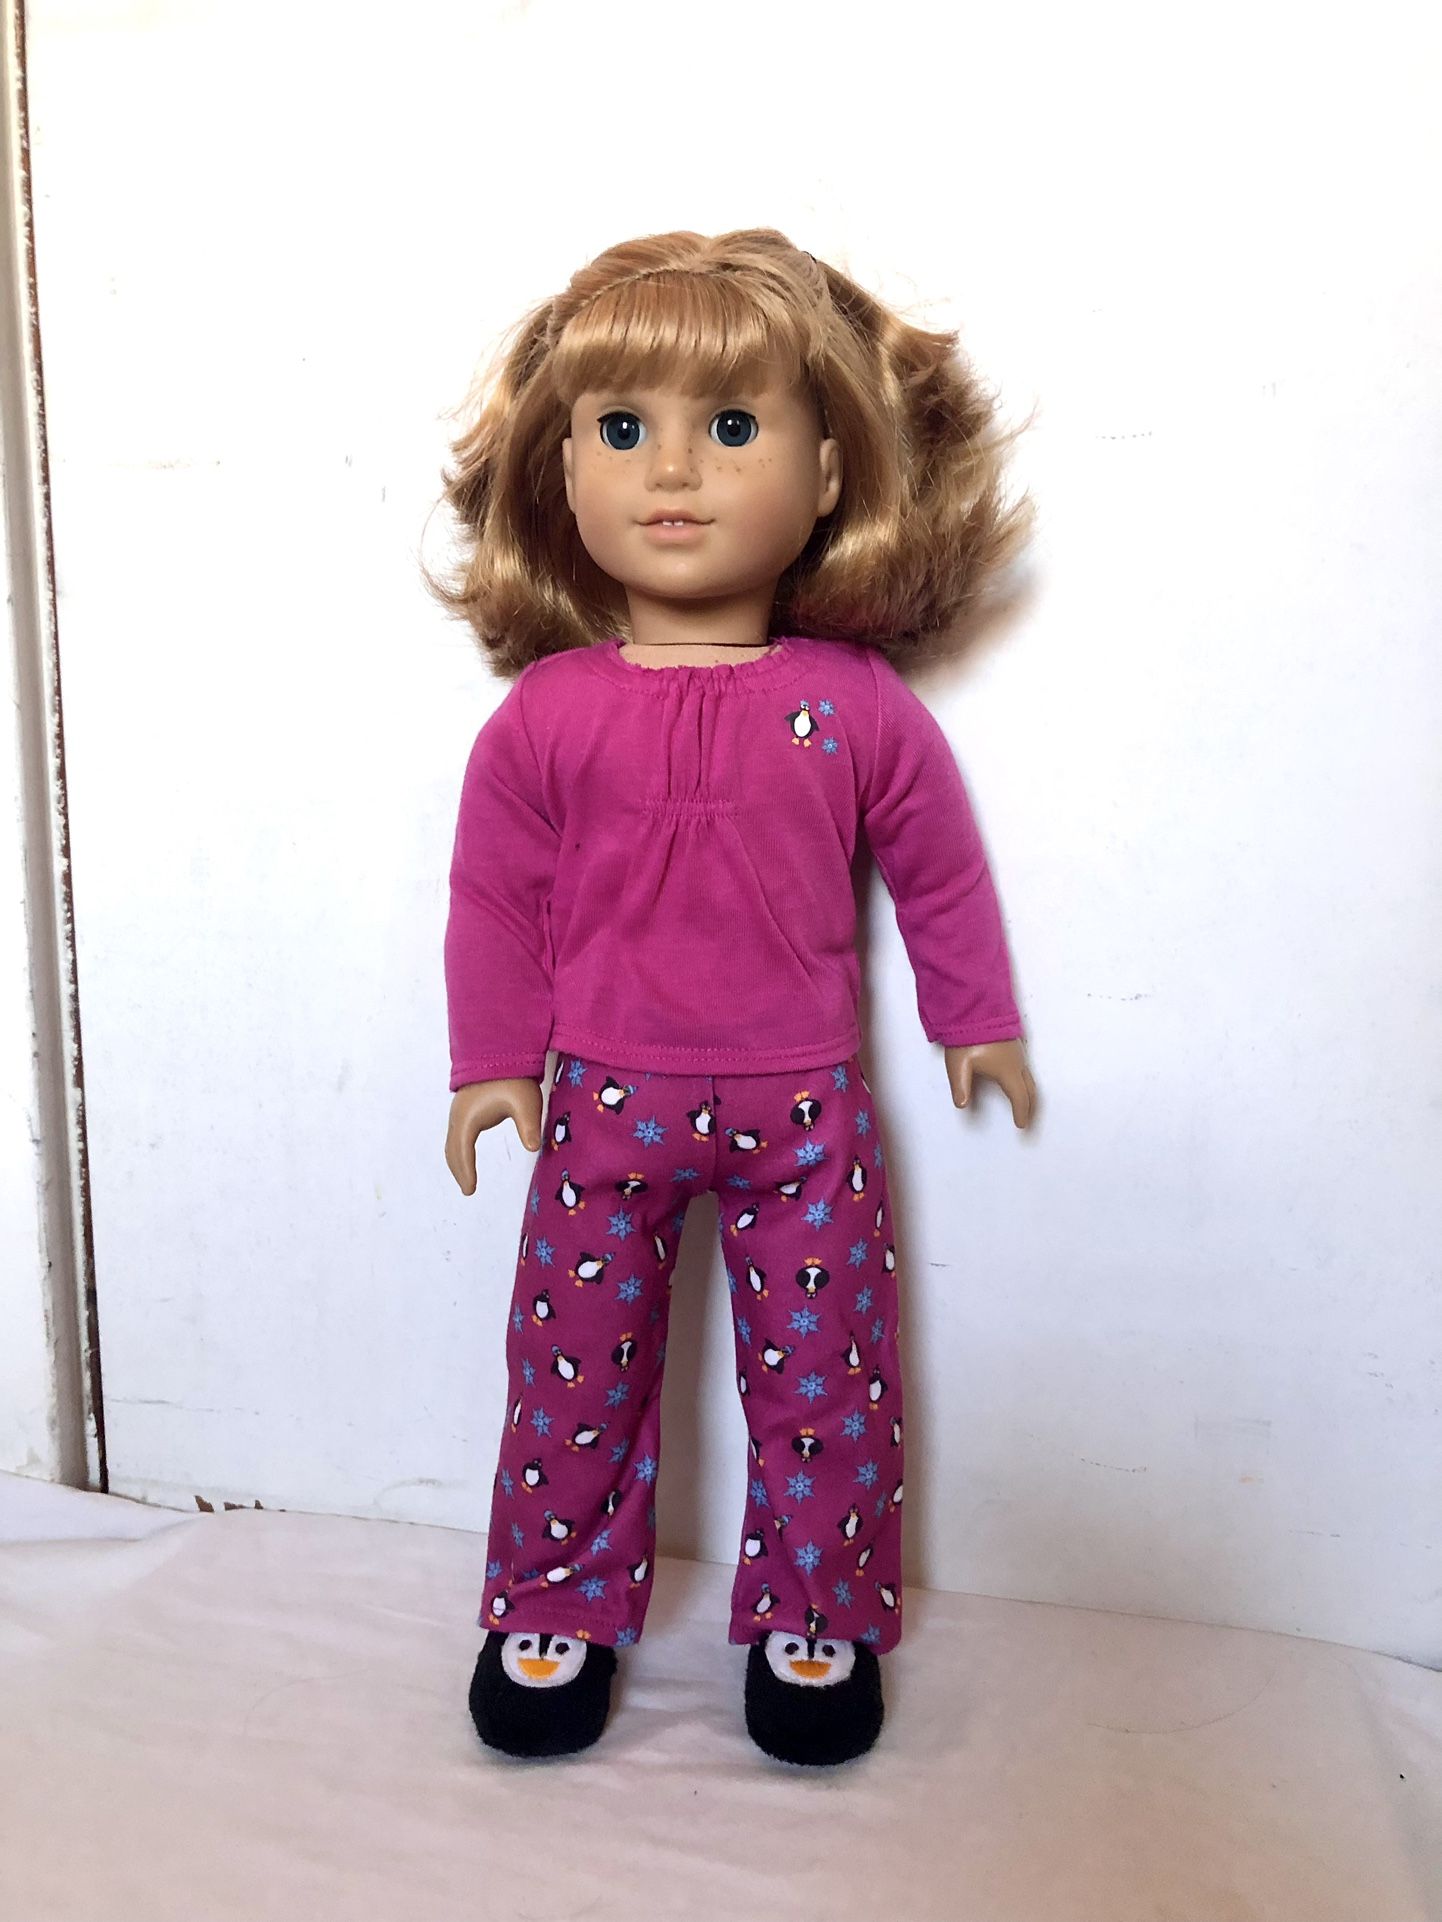 American Girl Winter Penguin Pajamas | Just Like You RETIRED 2009 | DOLL NOT INCLUDED